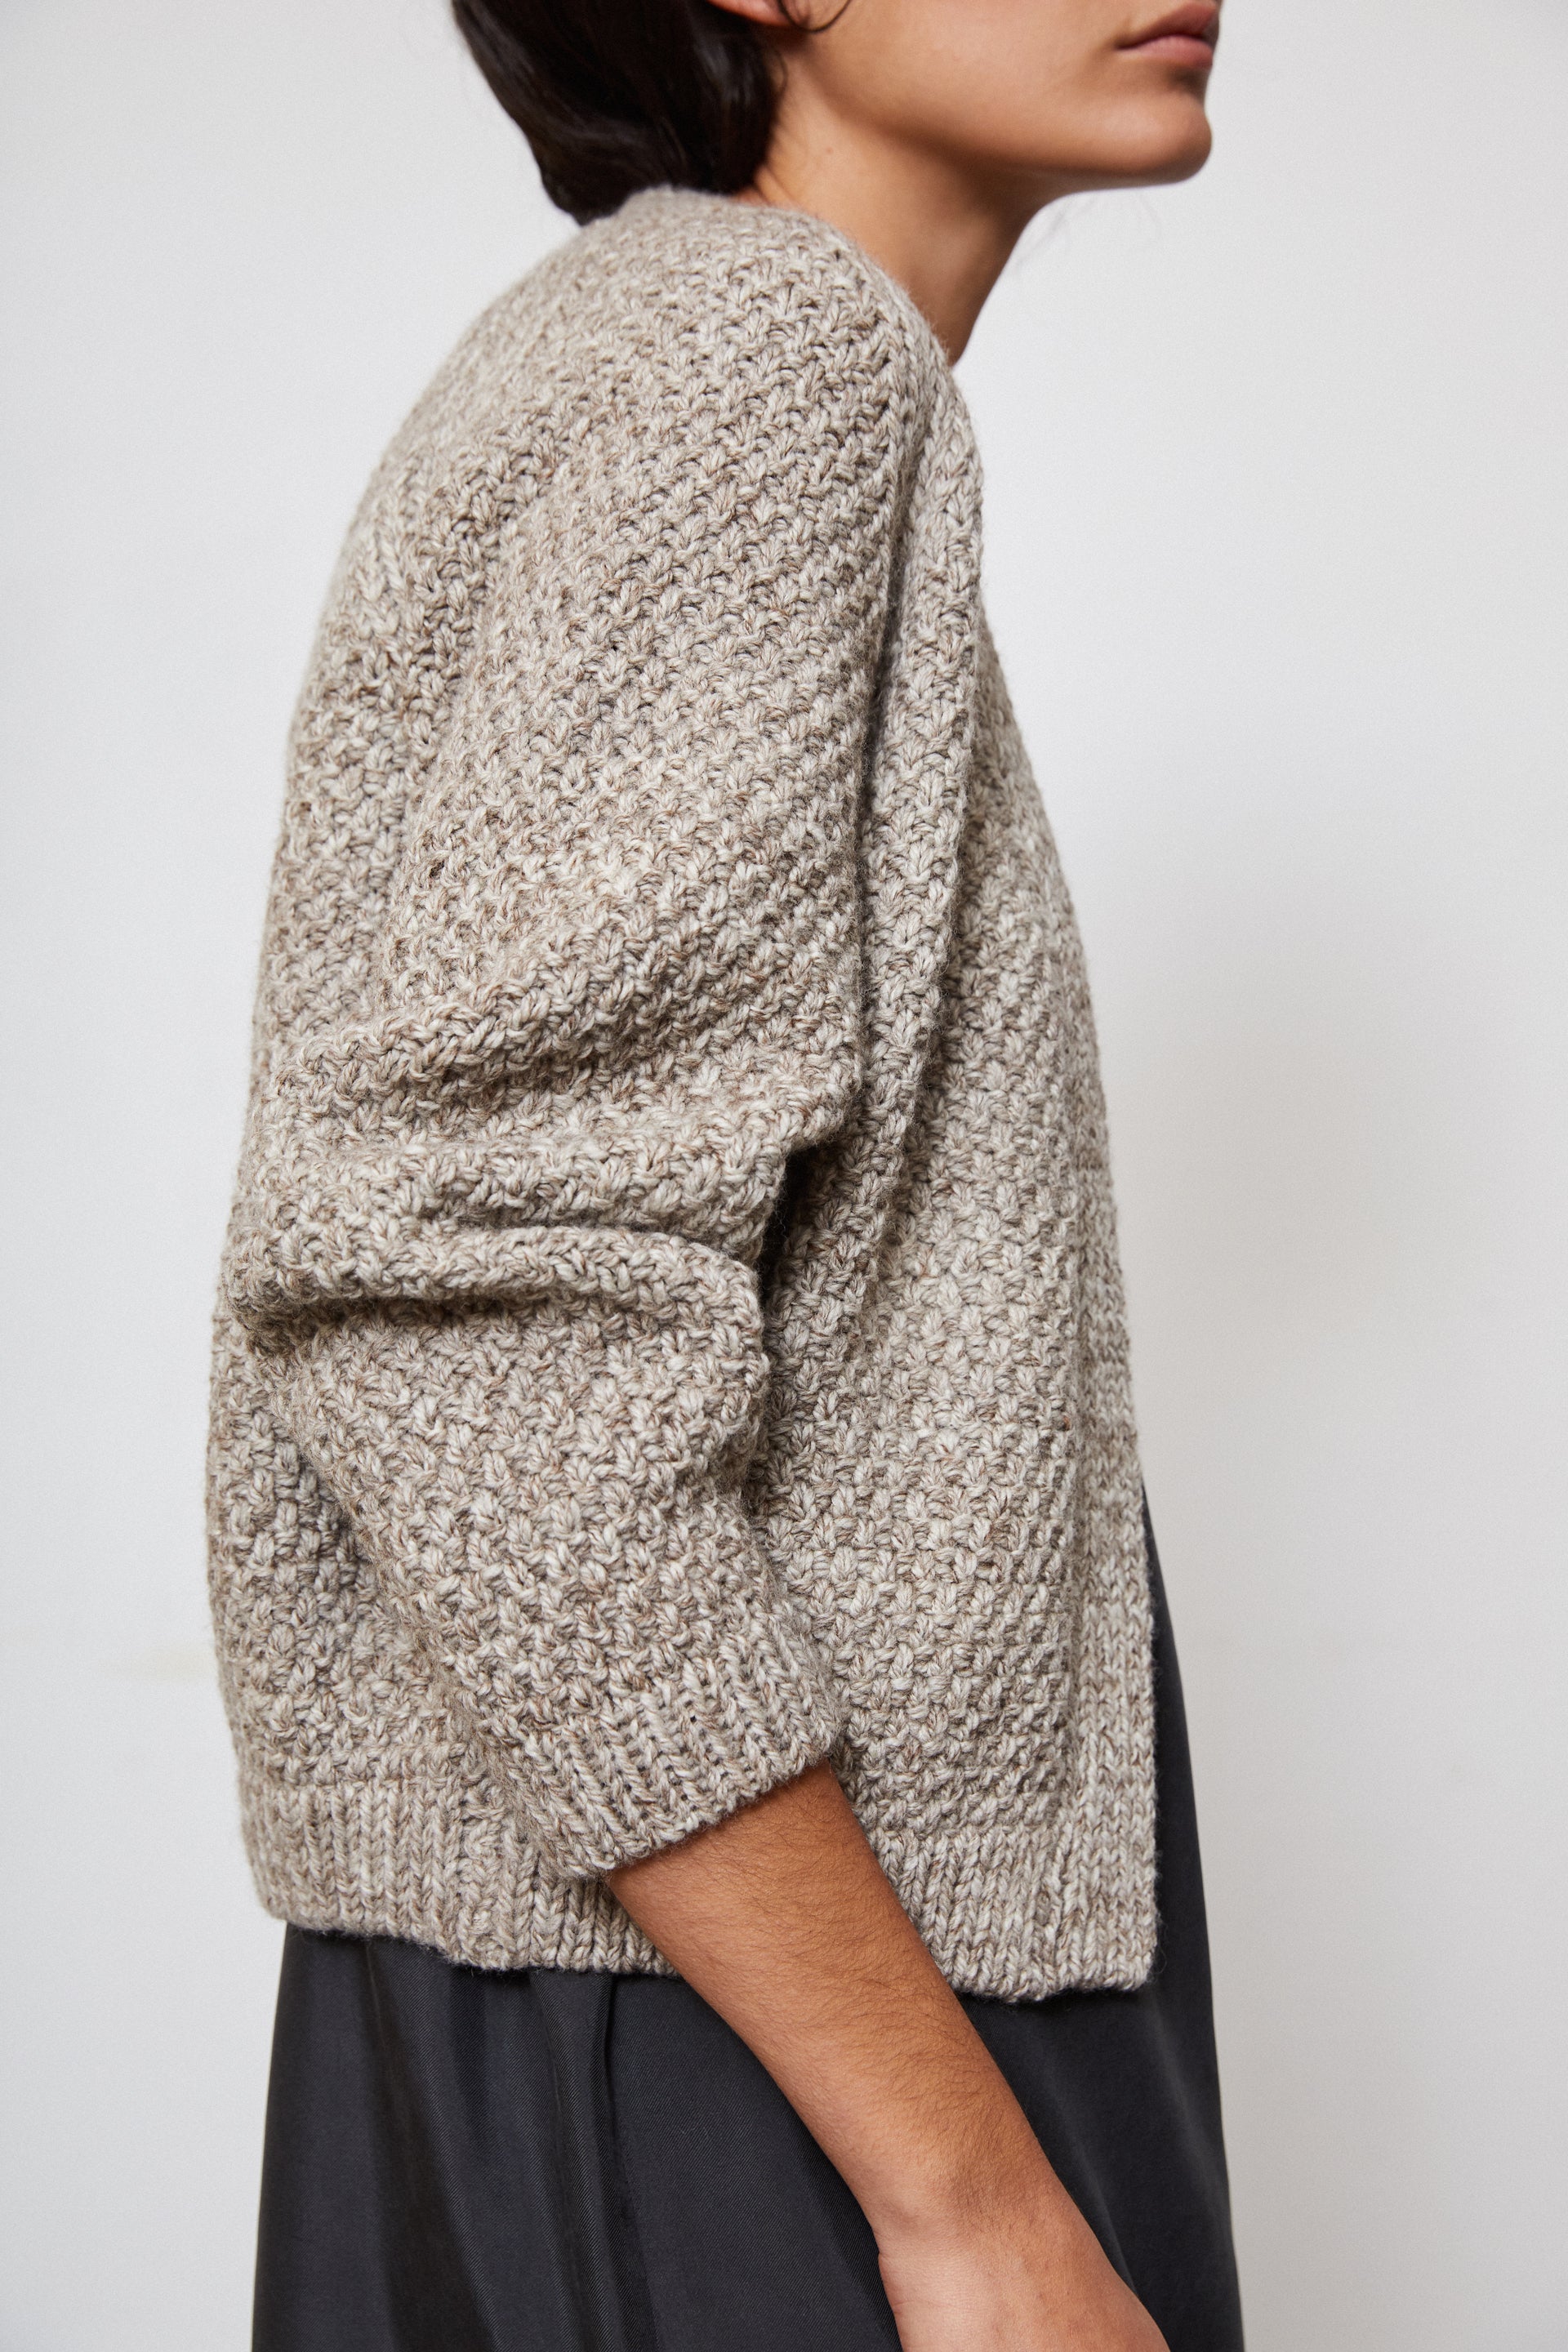 UNDYED, WOOL, HAND KNITTED, CARDIGAN, STYLISH, SUSTAINABLE, HAND-CRAFTED, WOMENSWEAR